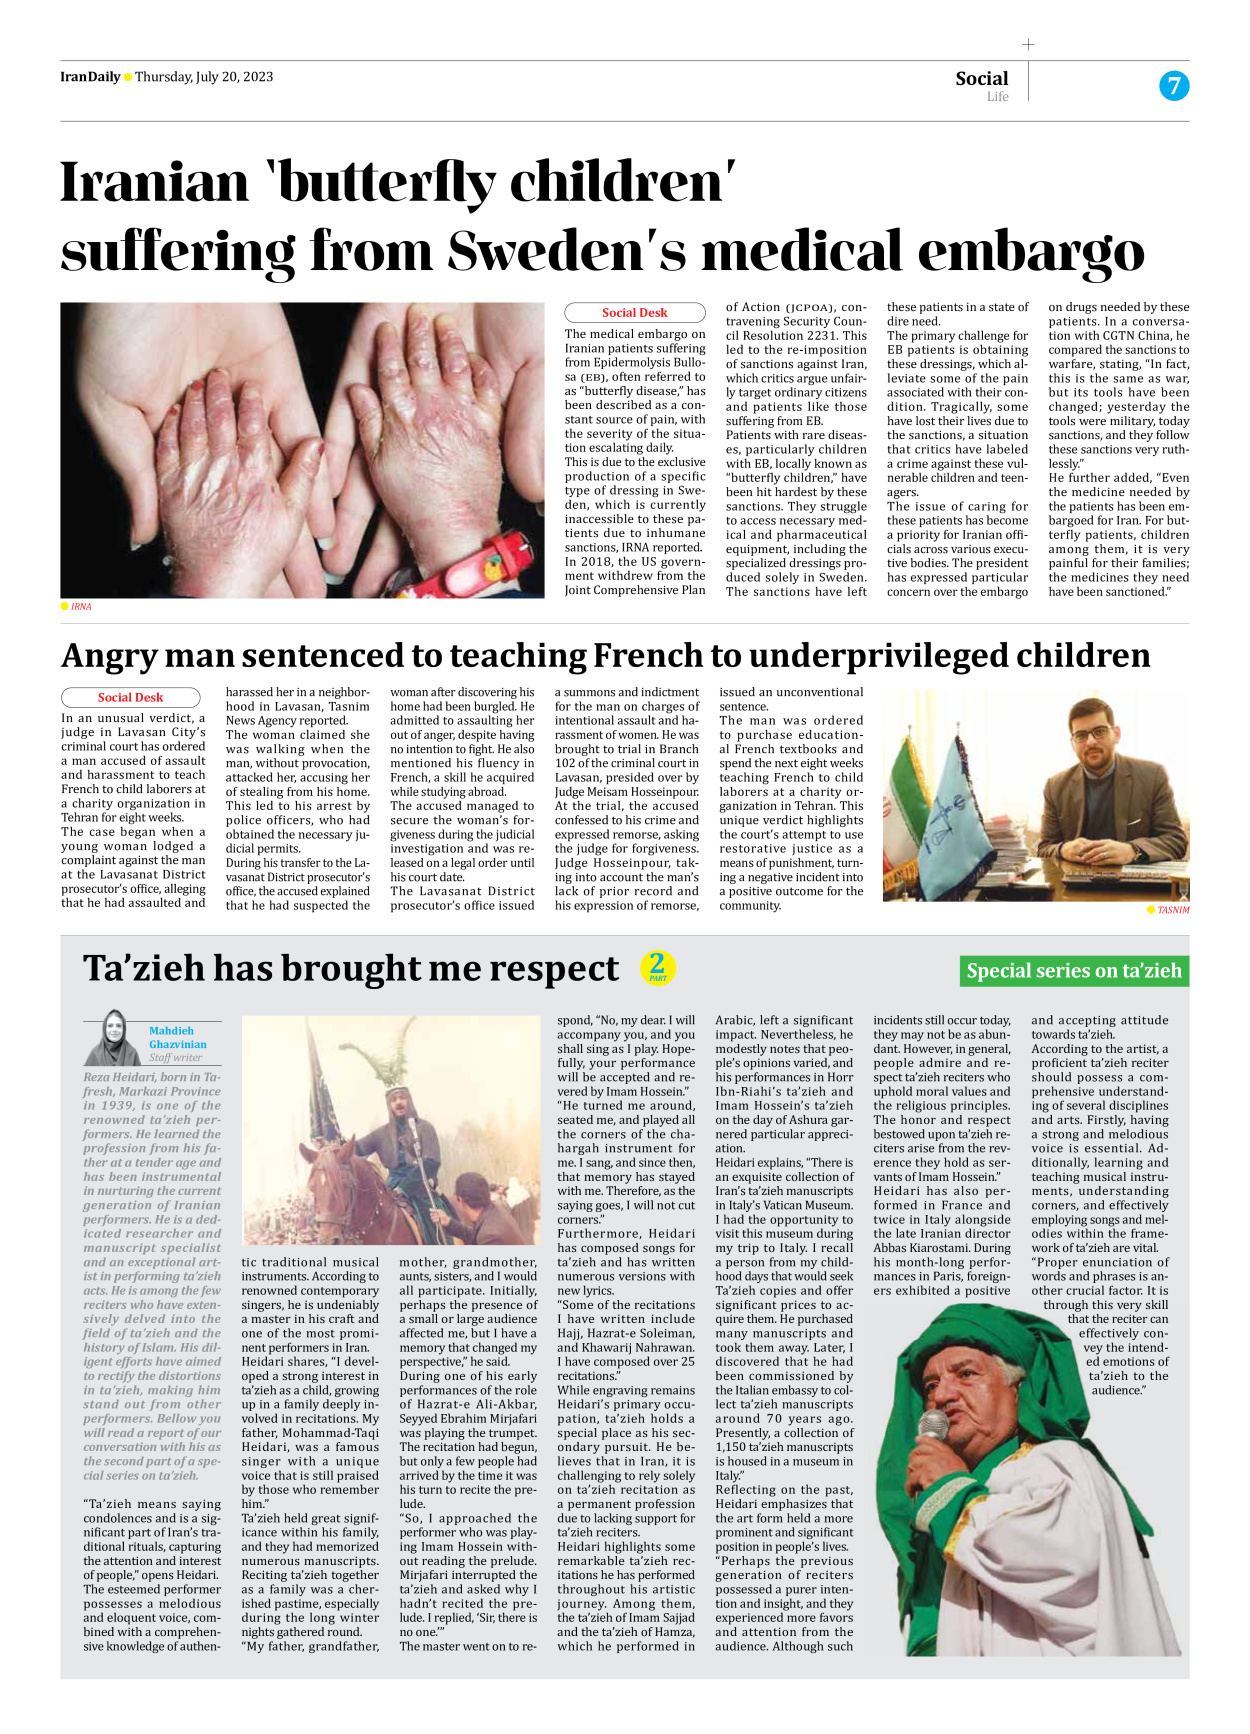 Iran Daily - Number Seven Thousand Three Hundred and Forty Four - 20 July 2023 - Page 7